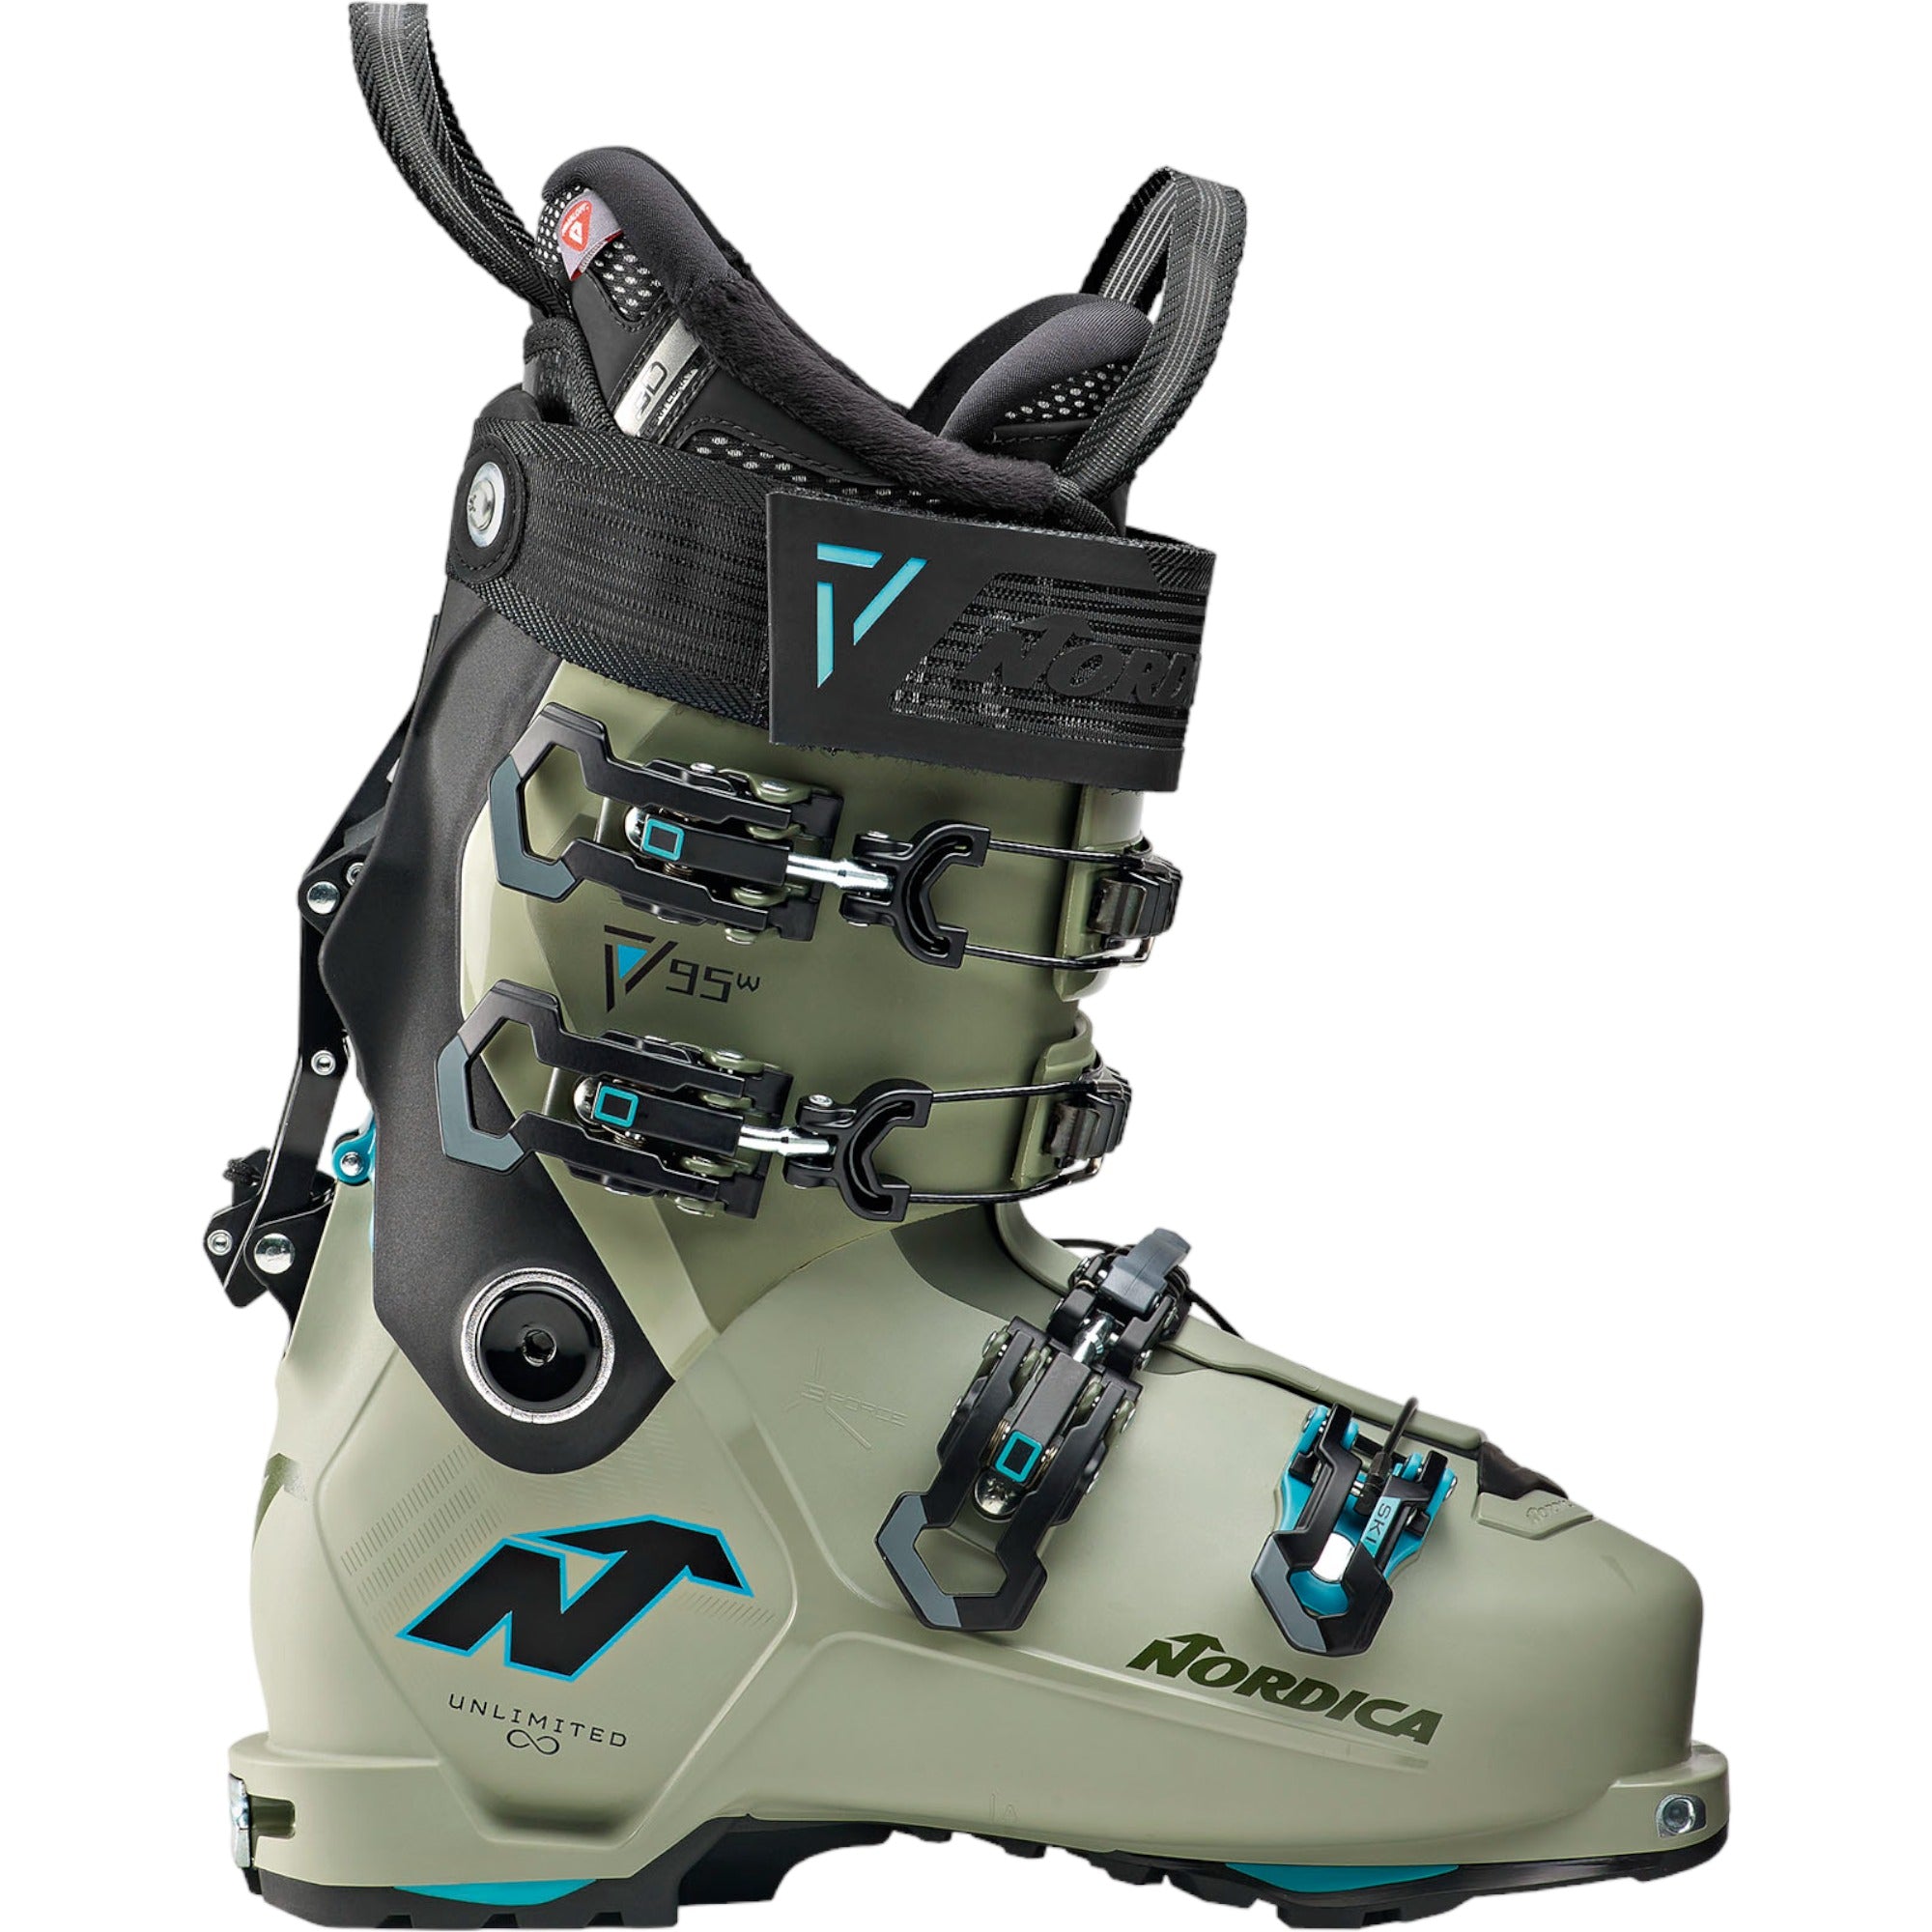 Alpine Touring and Backcountry Ski Boots – Oberson